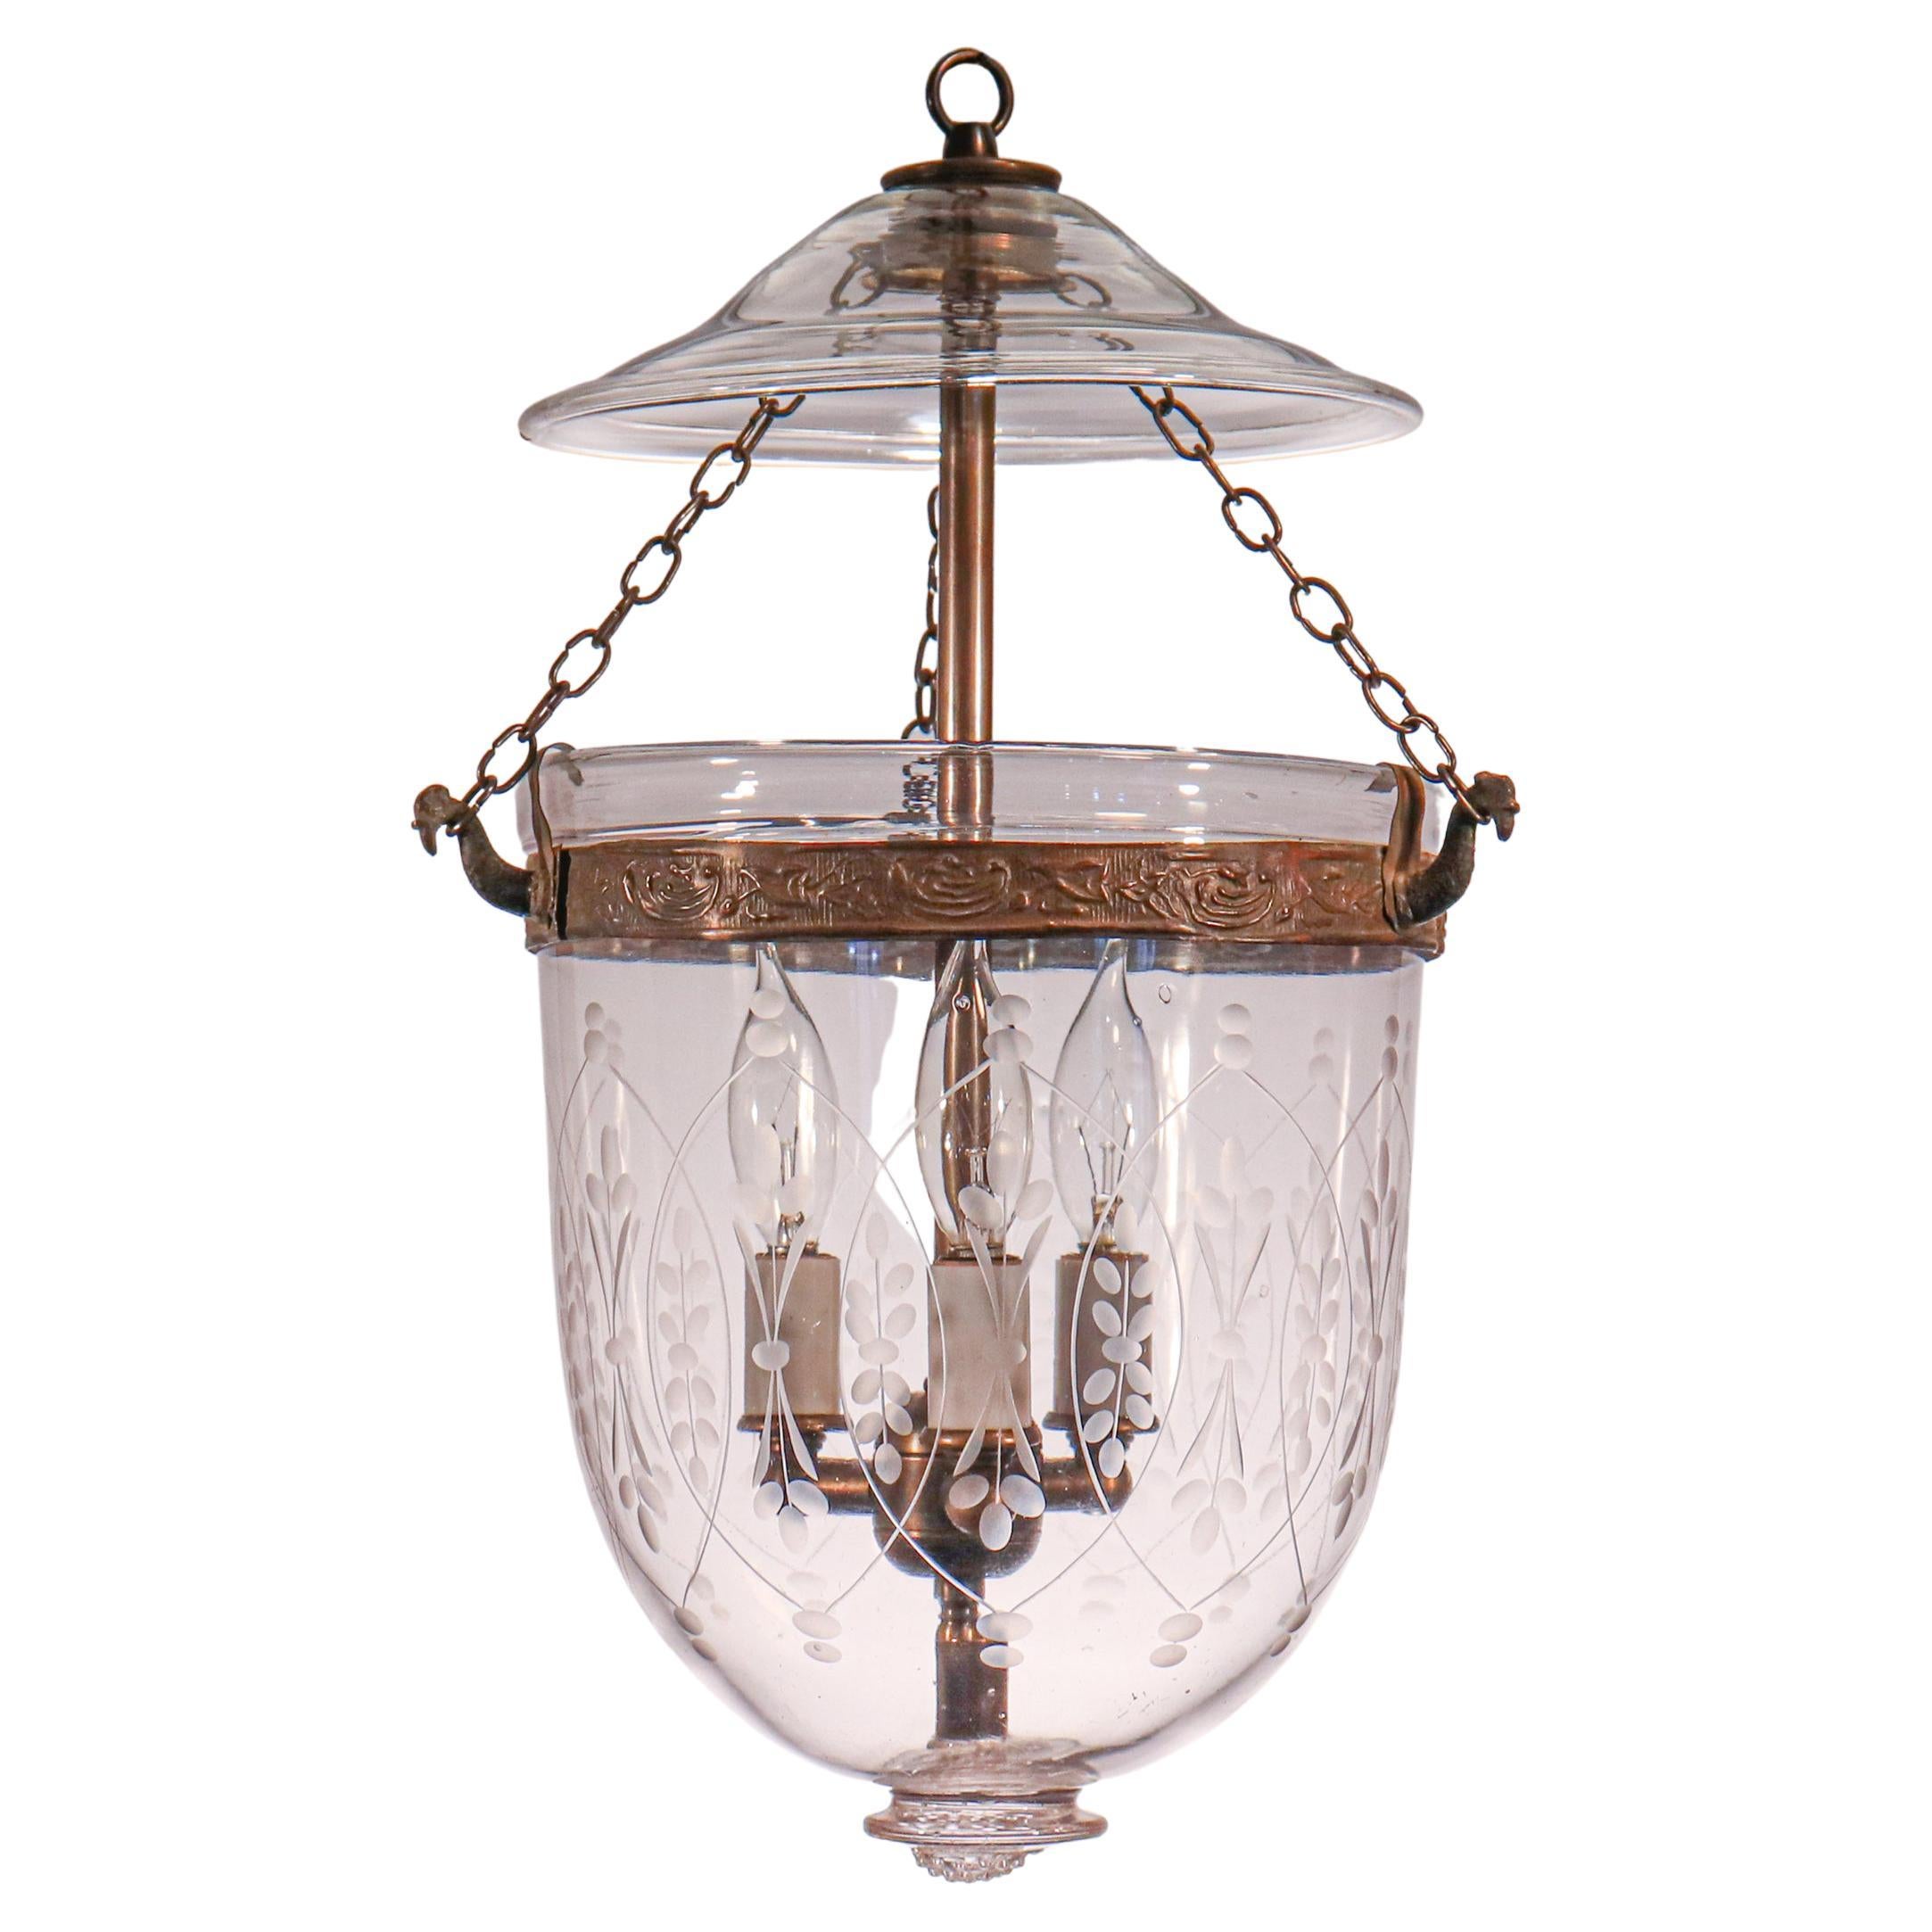 Antique Bell Jar Lantern with Wheat Etching